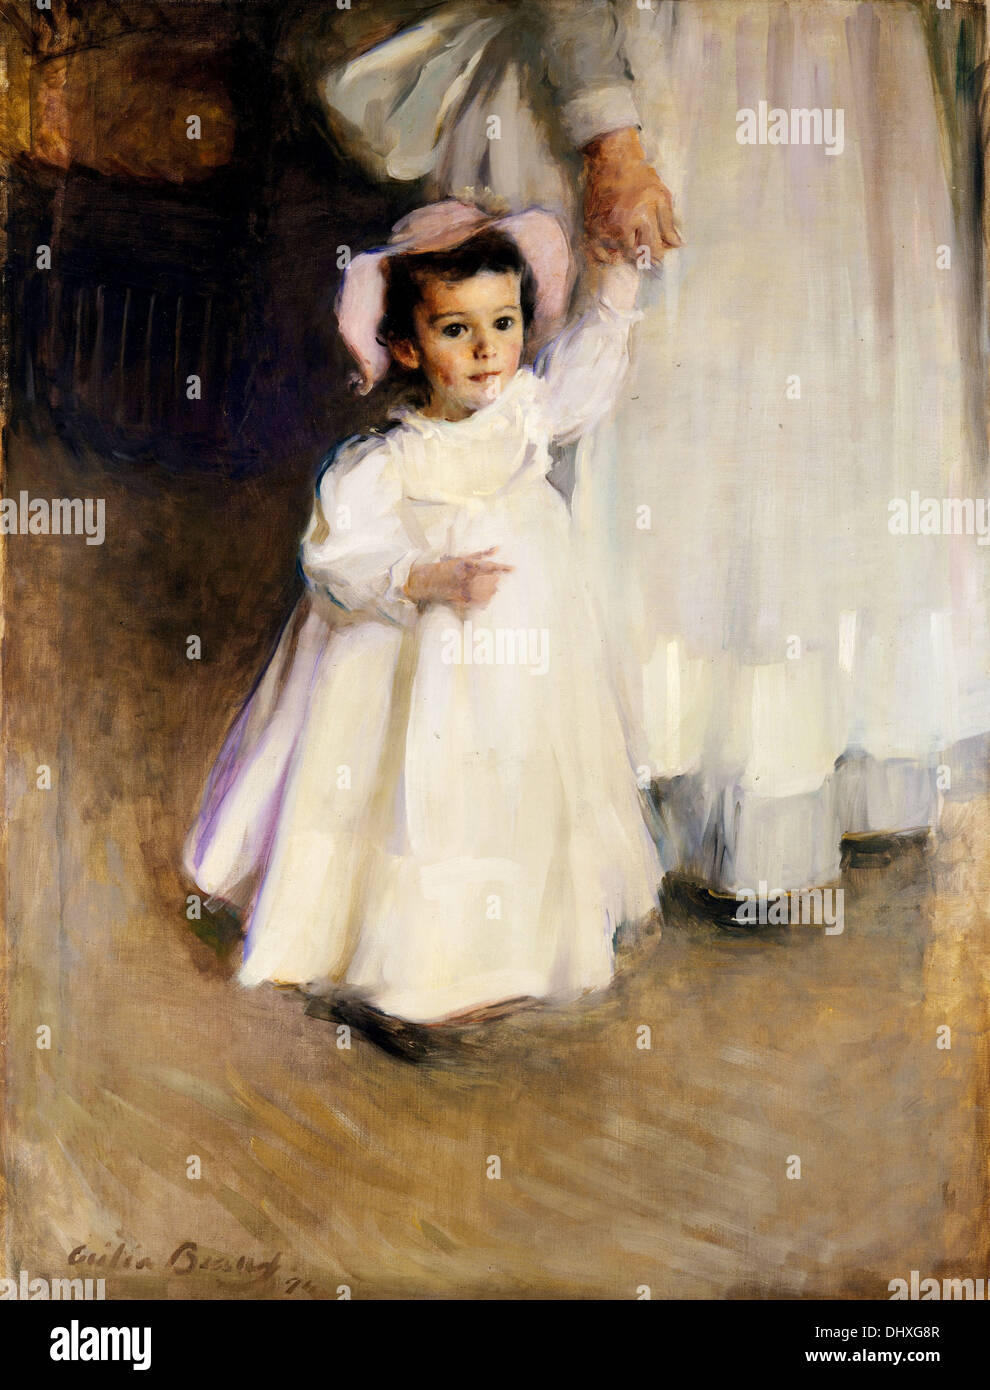 Ernesta (Child with Nurse) - by Cecilia Beaux, 1894 Stock Photo